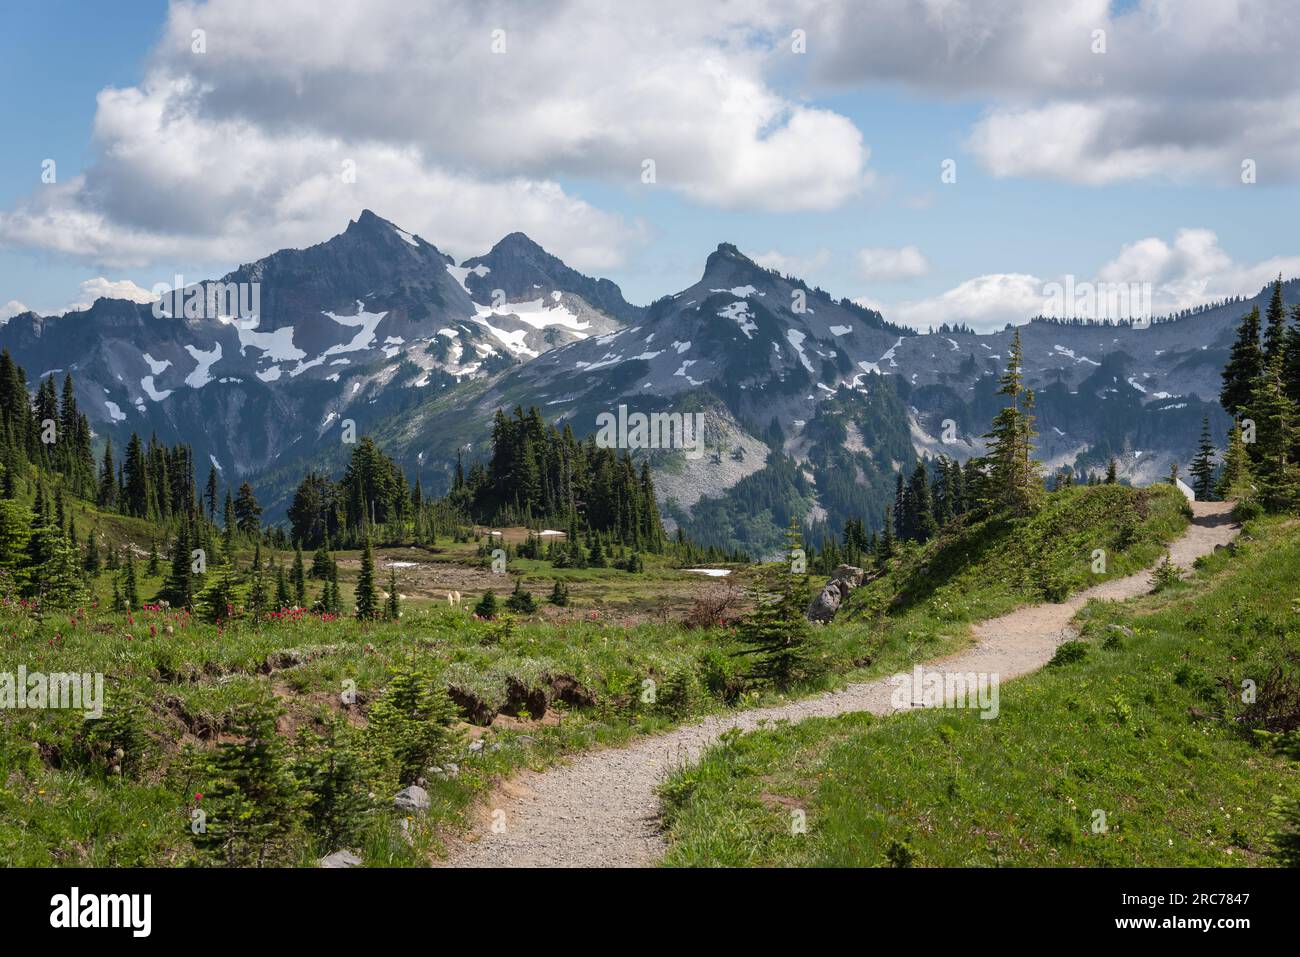 Picturesque hiking trail through magnificent wilderness mountains and meadows in Mt. Rainier National Park, Washington State Stock Photo